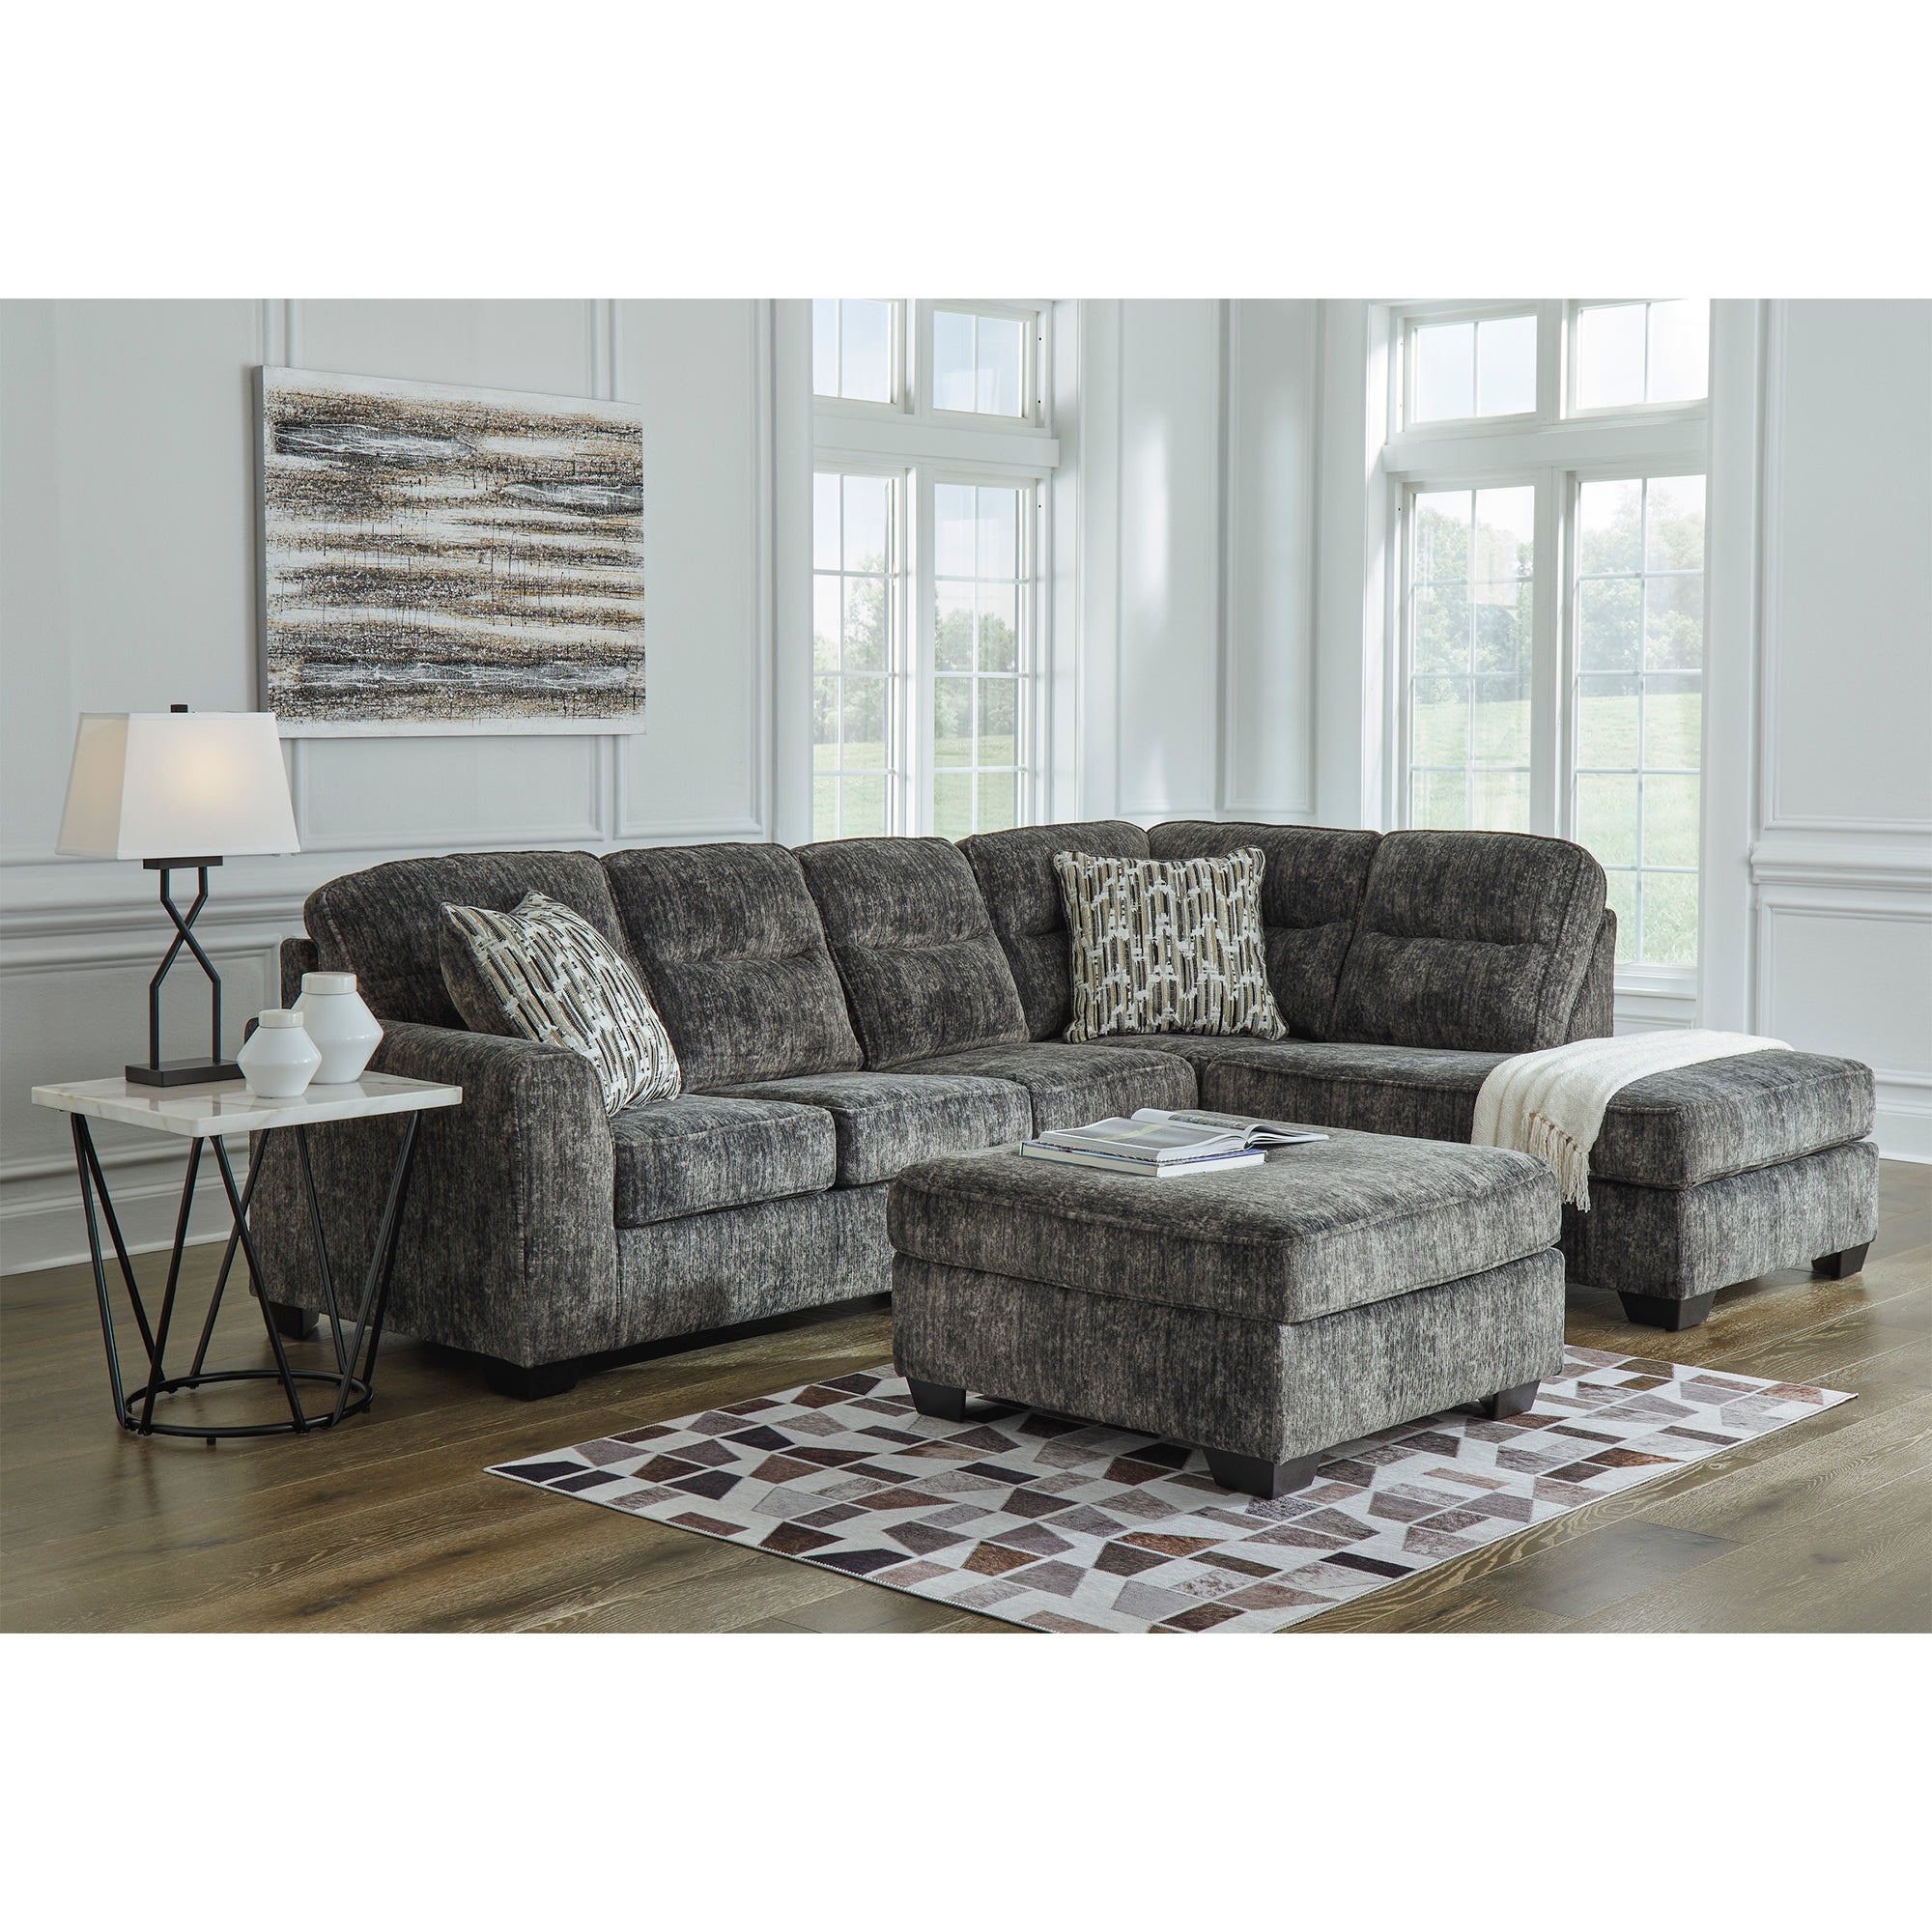 Lonoke 2-Piece Sectional with Chaise in Gunmetal Color